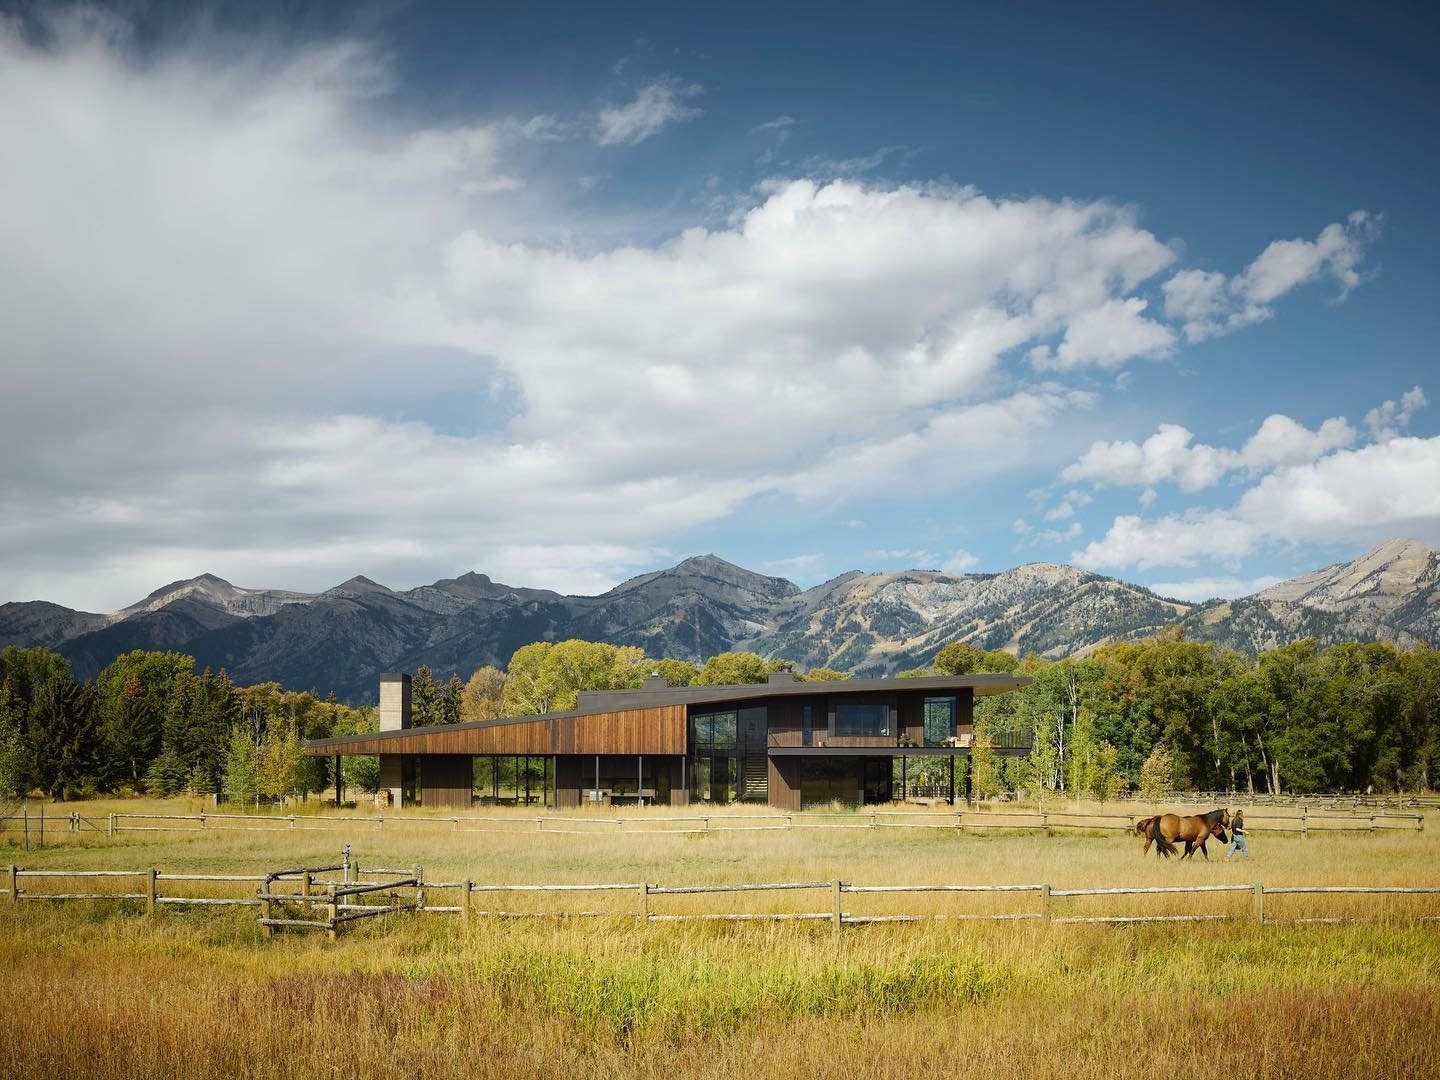 I always dreamt of a home where the horses are visible just outside the windows and that&rsquo;s exactly what CLB Architects created at Black Fox Ranch, featured in the current issue of Big Sky Journal HOME. The clients were New Yorkers eager to embr